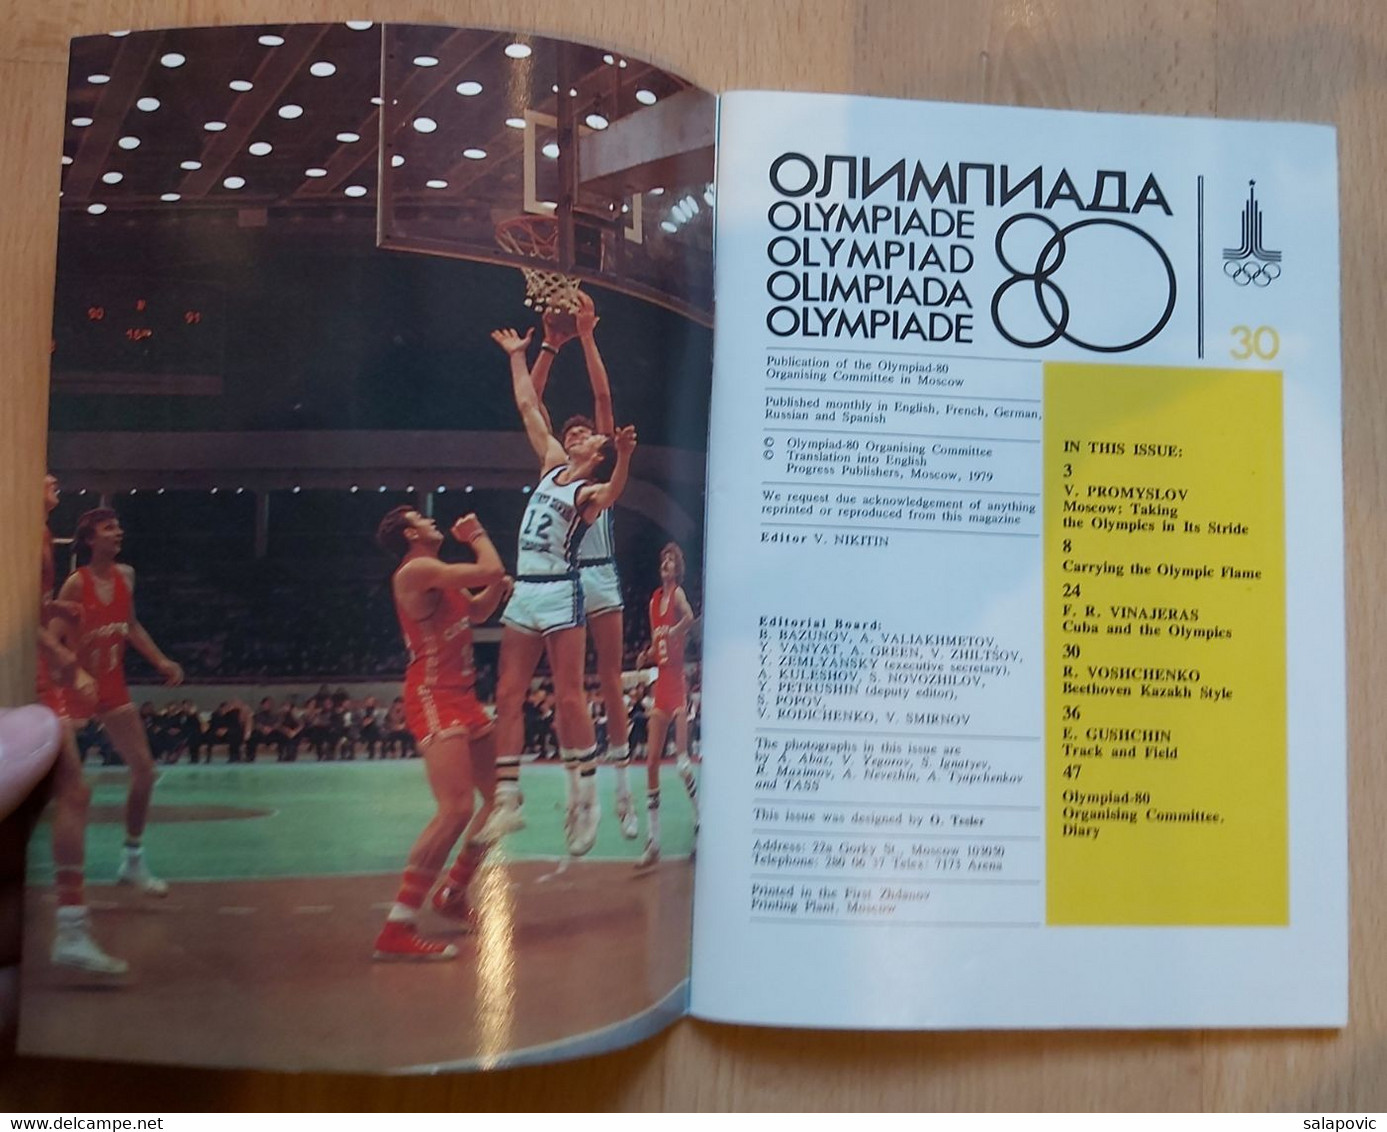 Moscow 1980 Olympic Games, PROGRAM, Publication Of The Olympiad 80 Organising Committee In Moscow - Livres